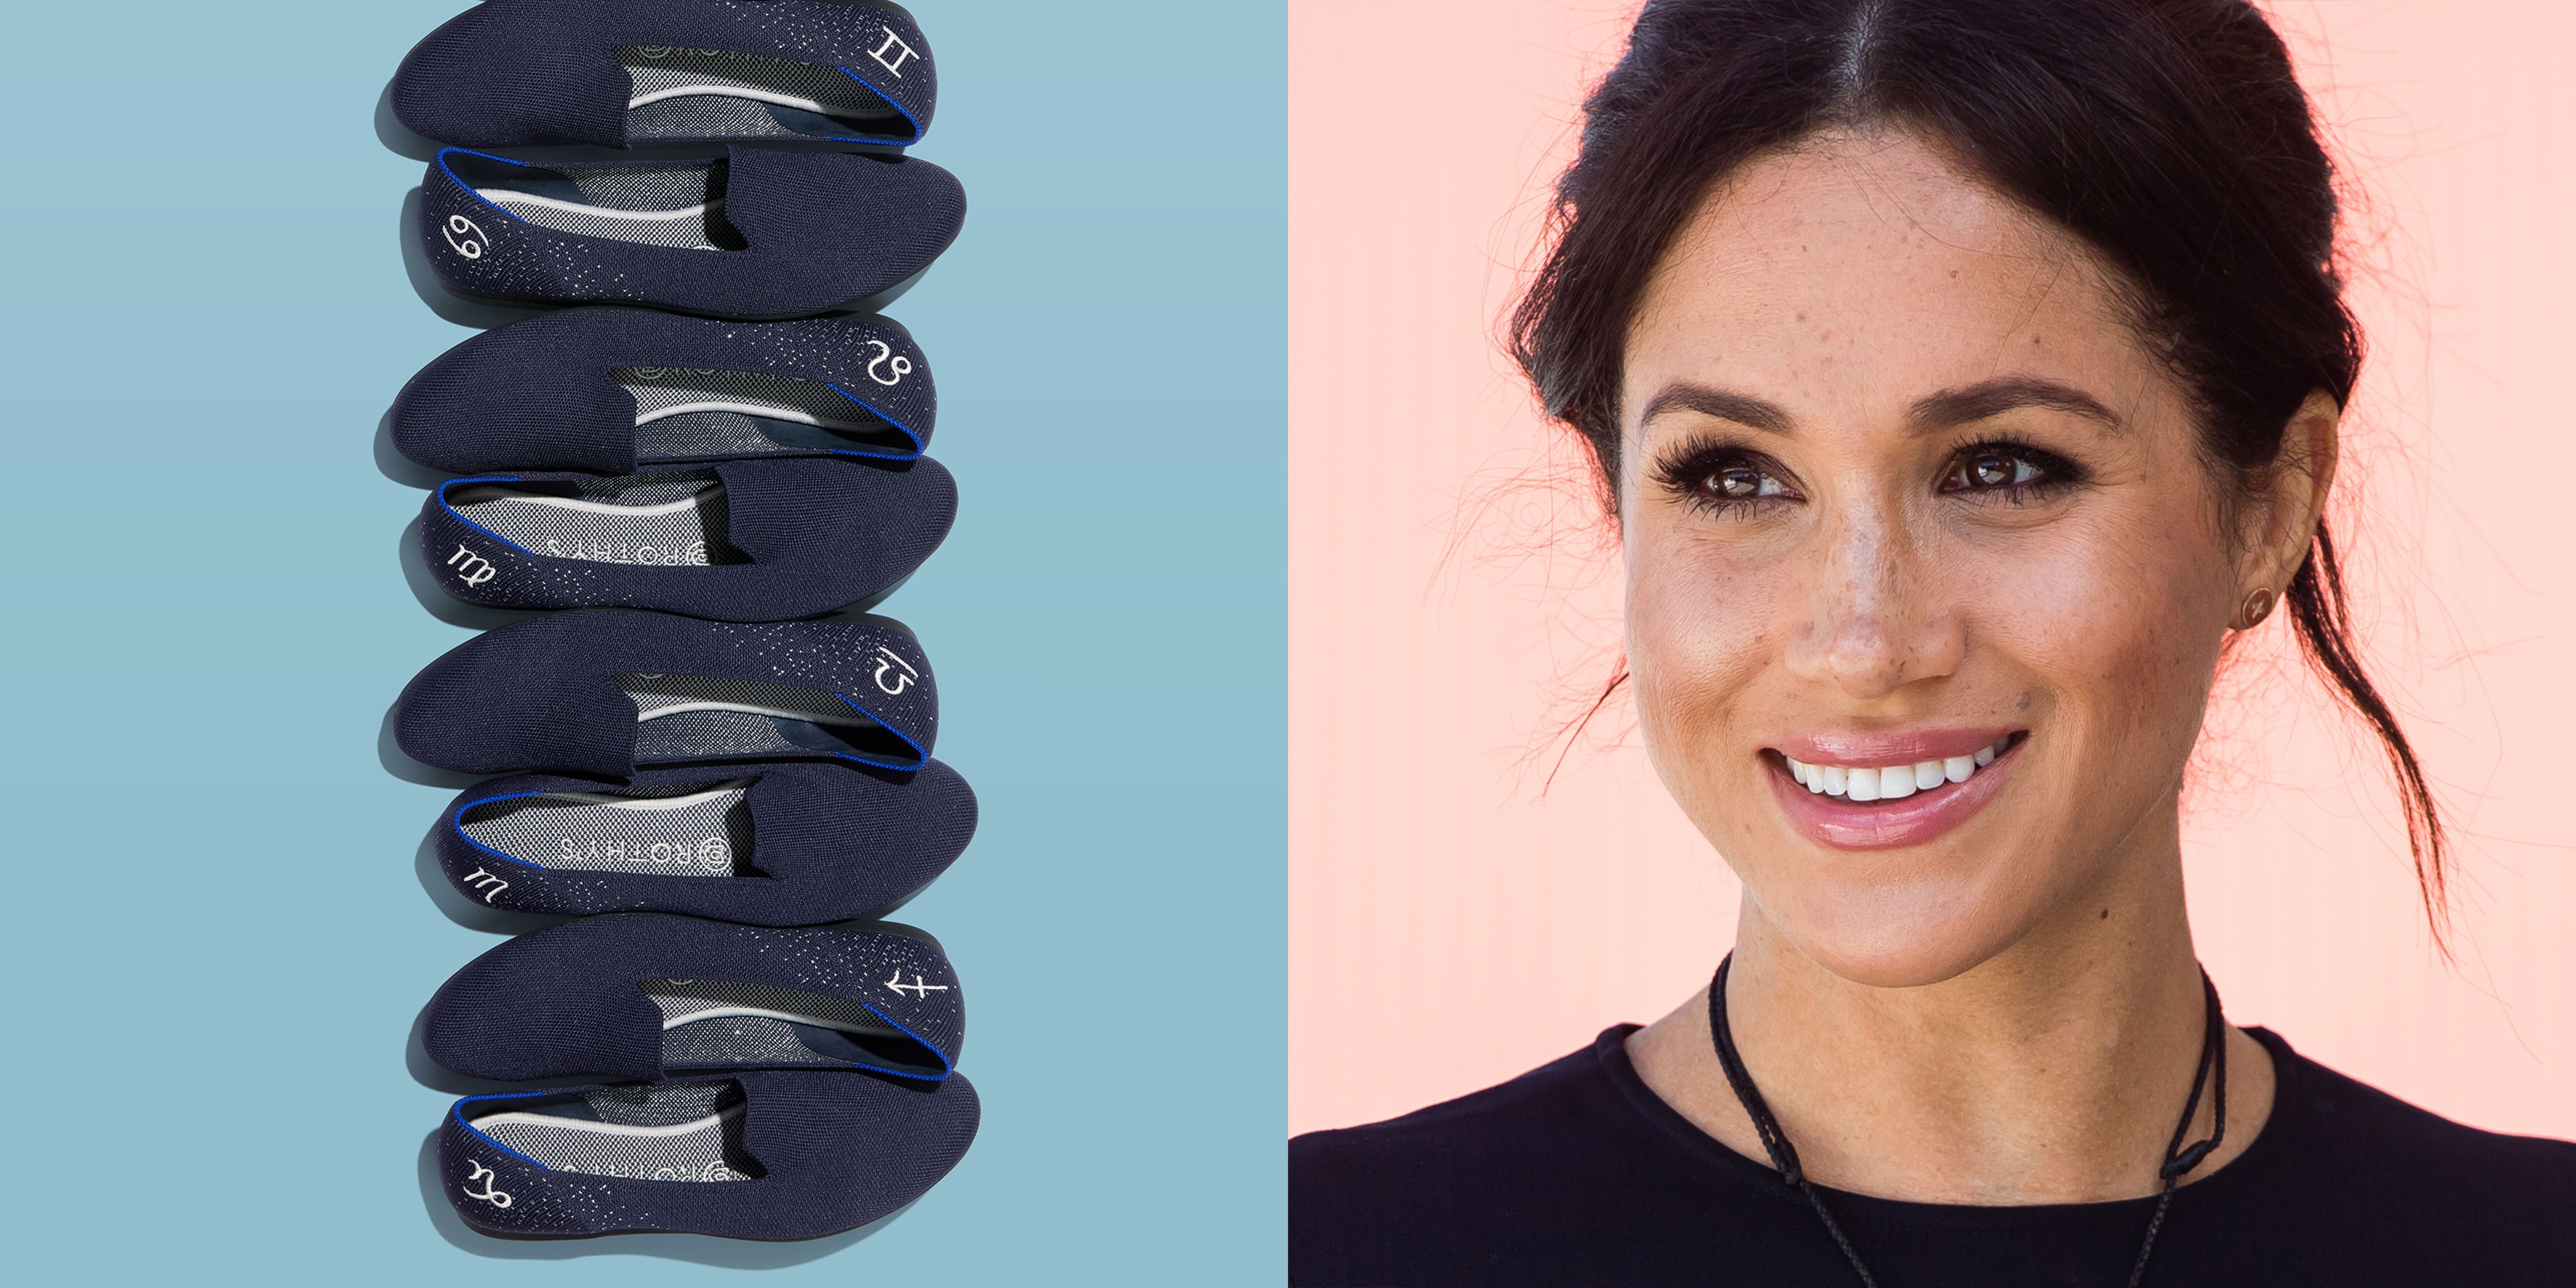 meghan markle and rothys